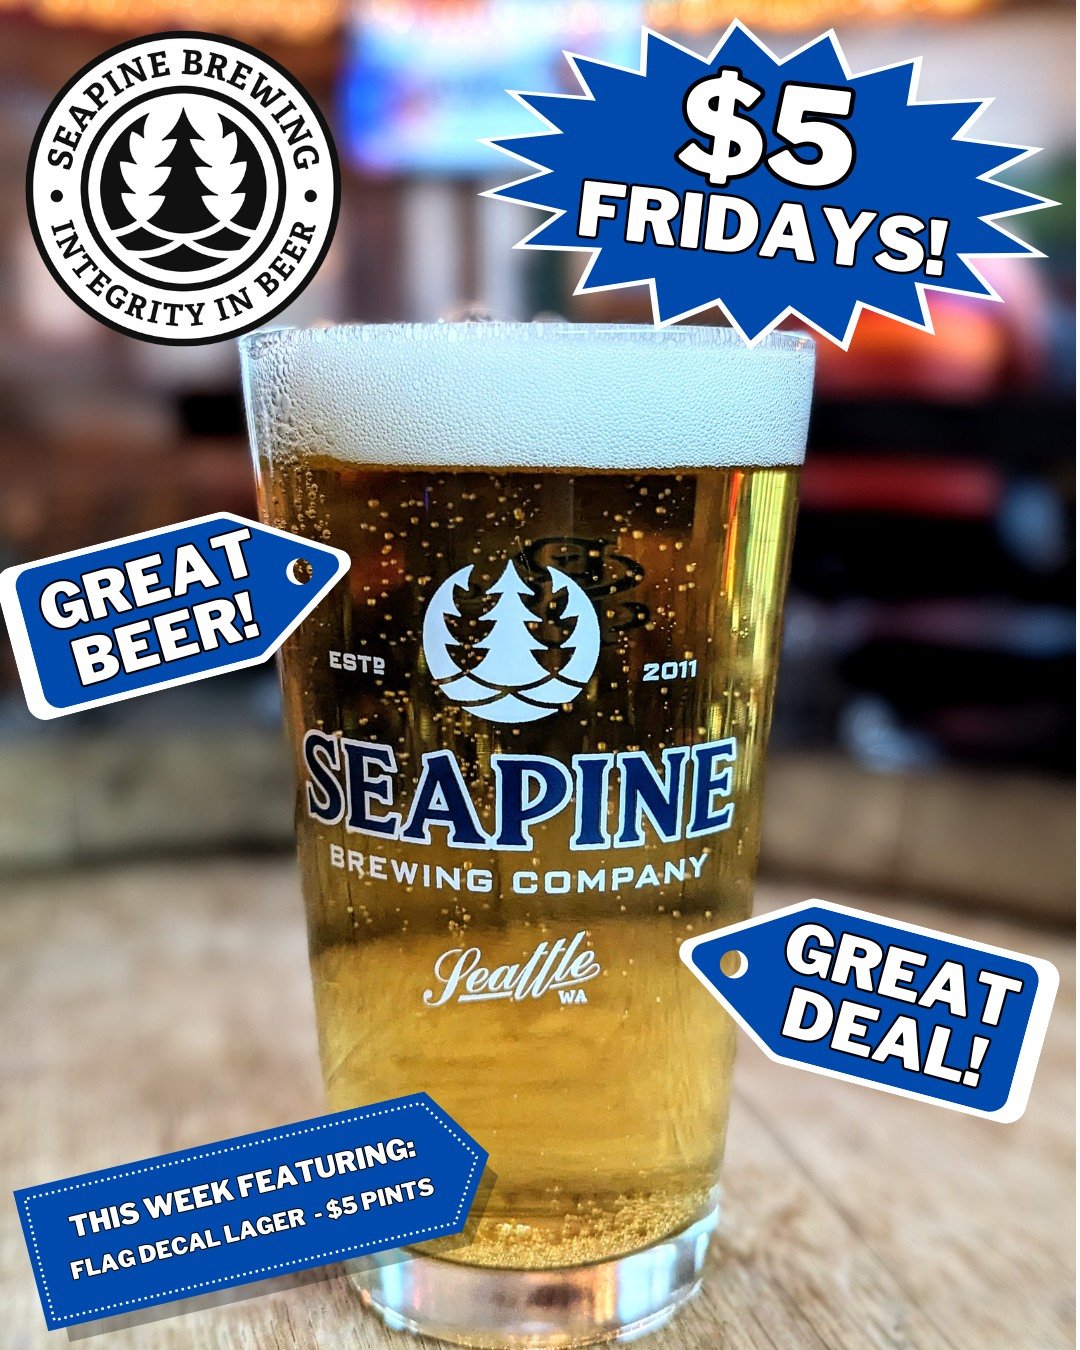 TGIF! We're serving up $5 pints of Flag Decal lager all day!